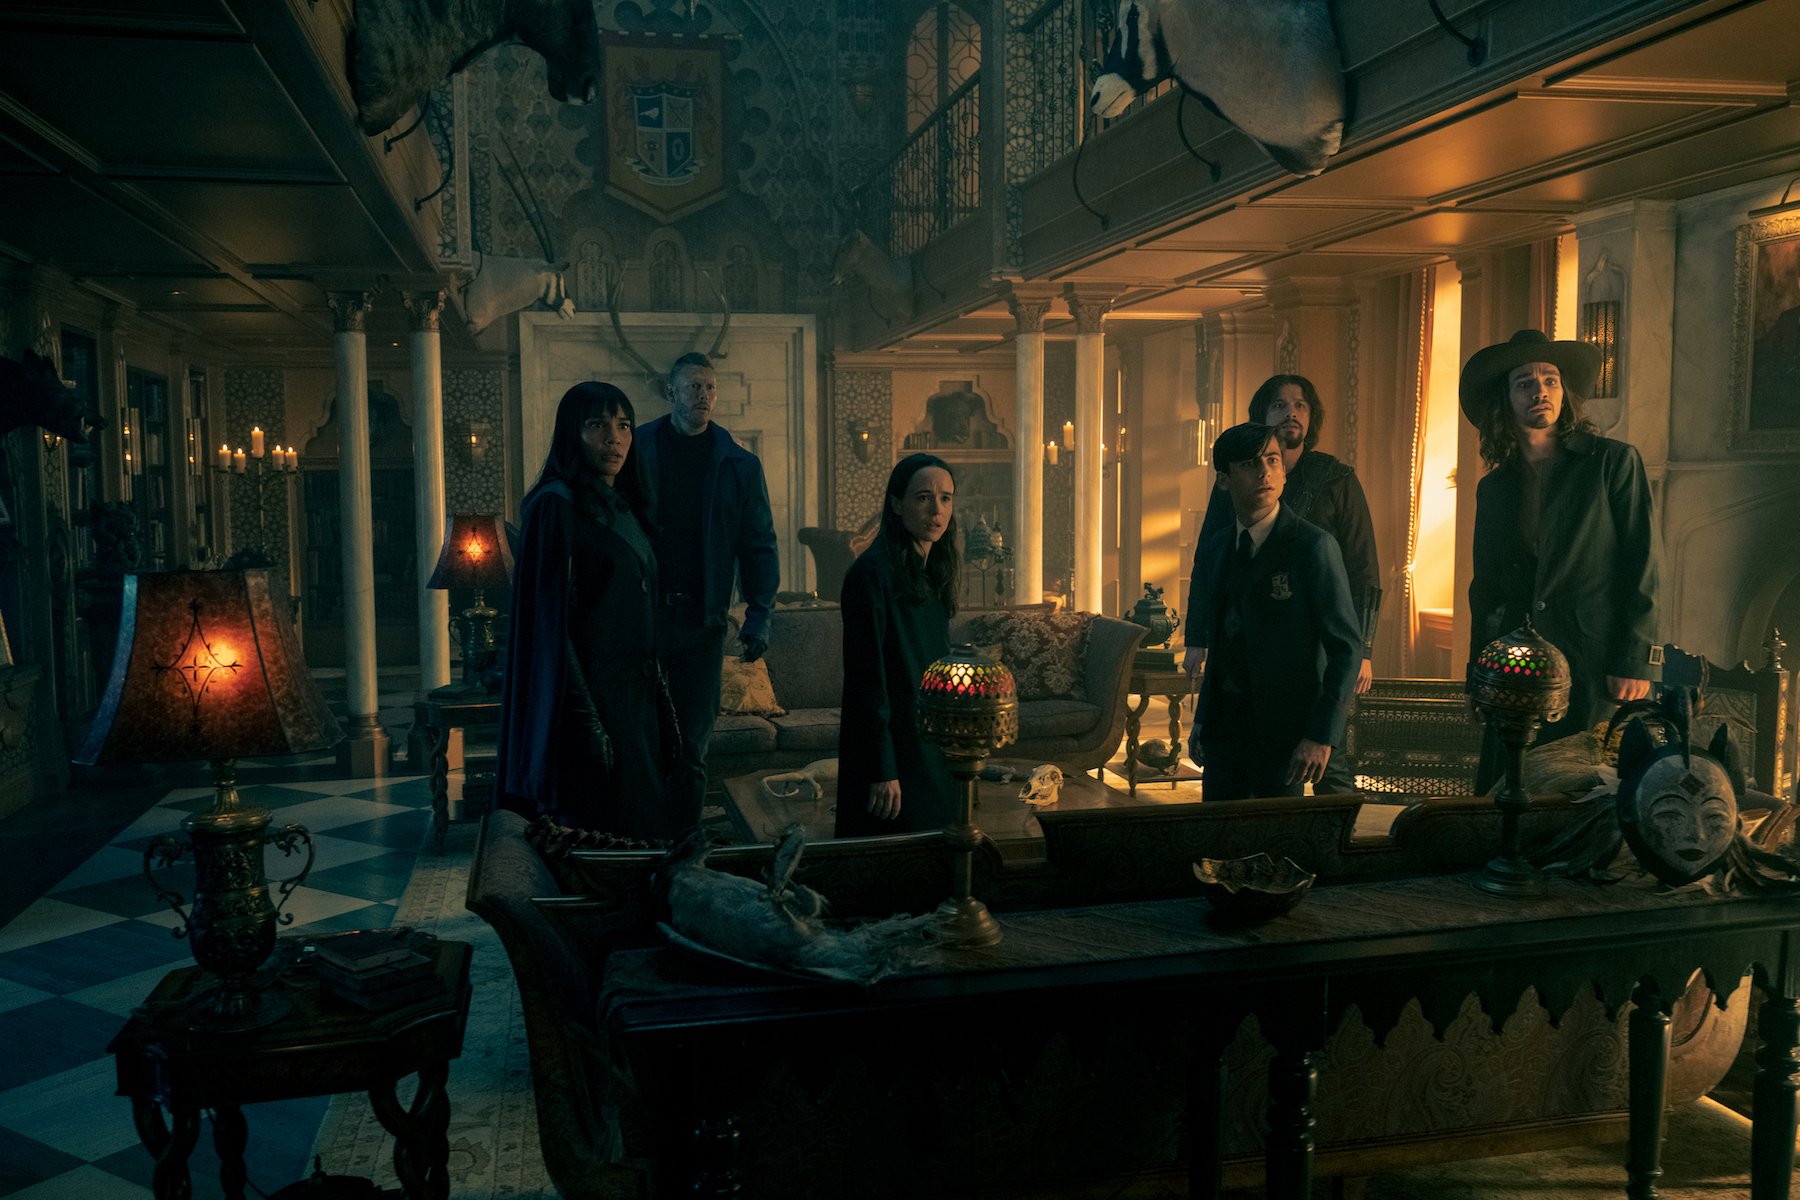 'The Umbrella Academy' Season 3  characters, the Hargreeves siblings, seen here in a production still from season 2. Allison, Luther, Vanya, Diego, Five, Klaus are all dressed in black and staring at something off screen.